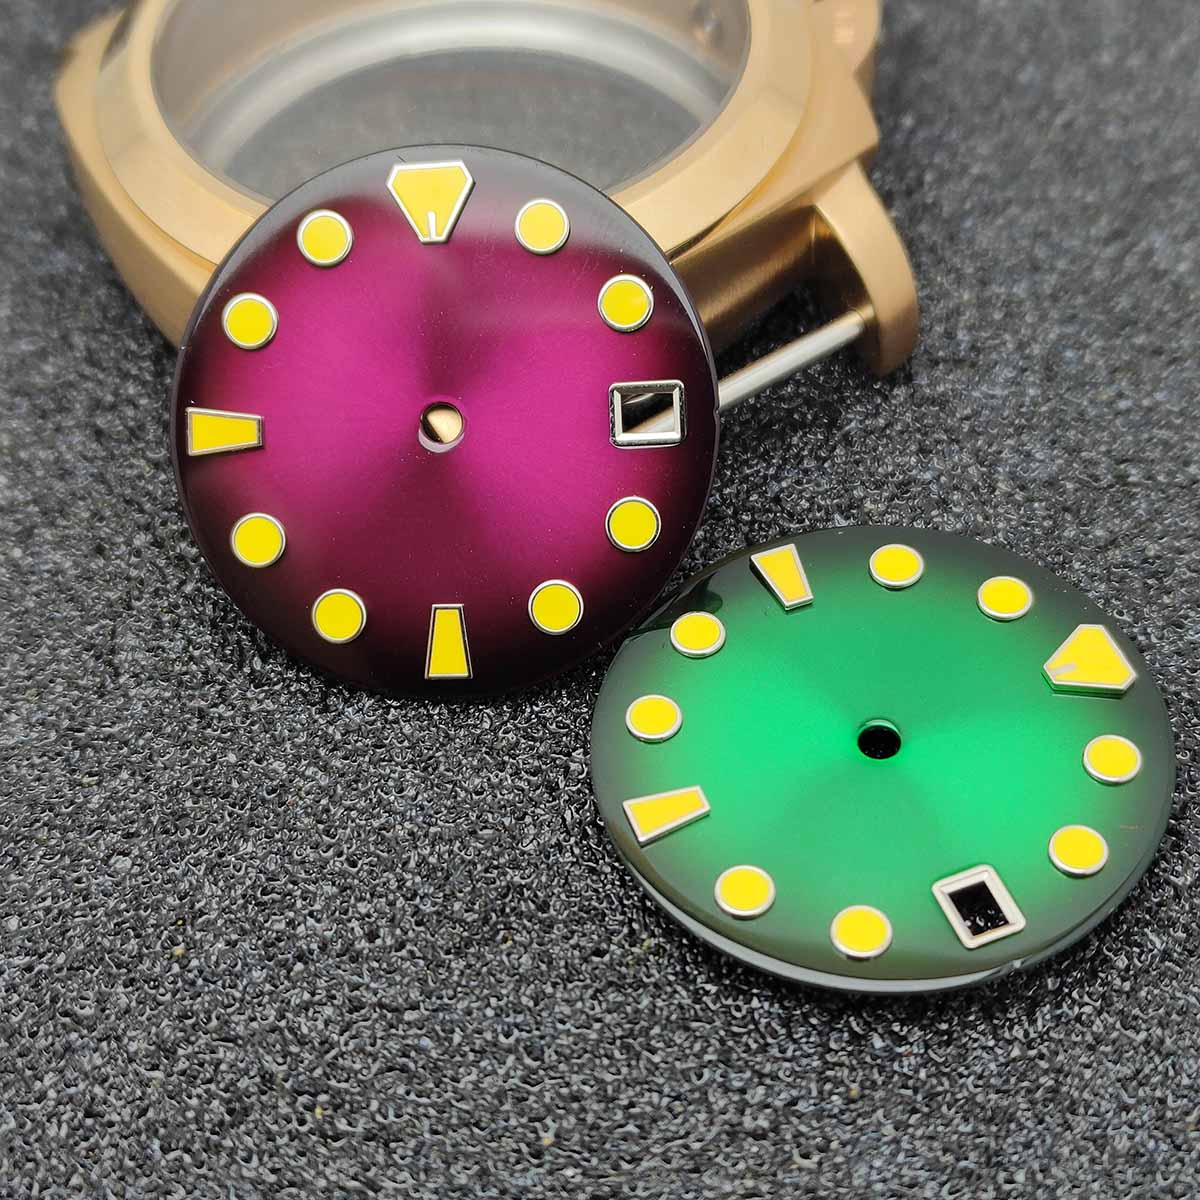 Custom Design NH36 Luminous Watch Dial Seiko Quality for Bulk Production with day date movement - Beryl Watch